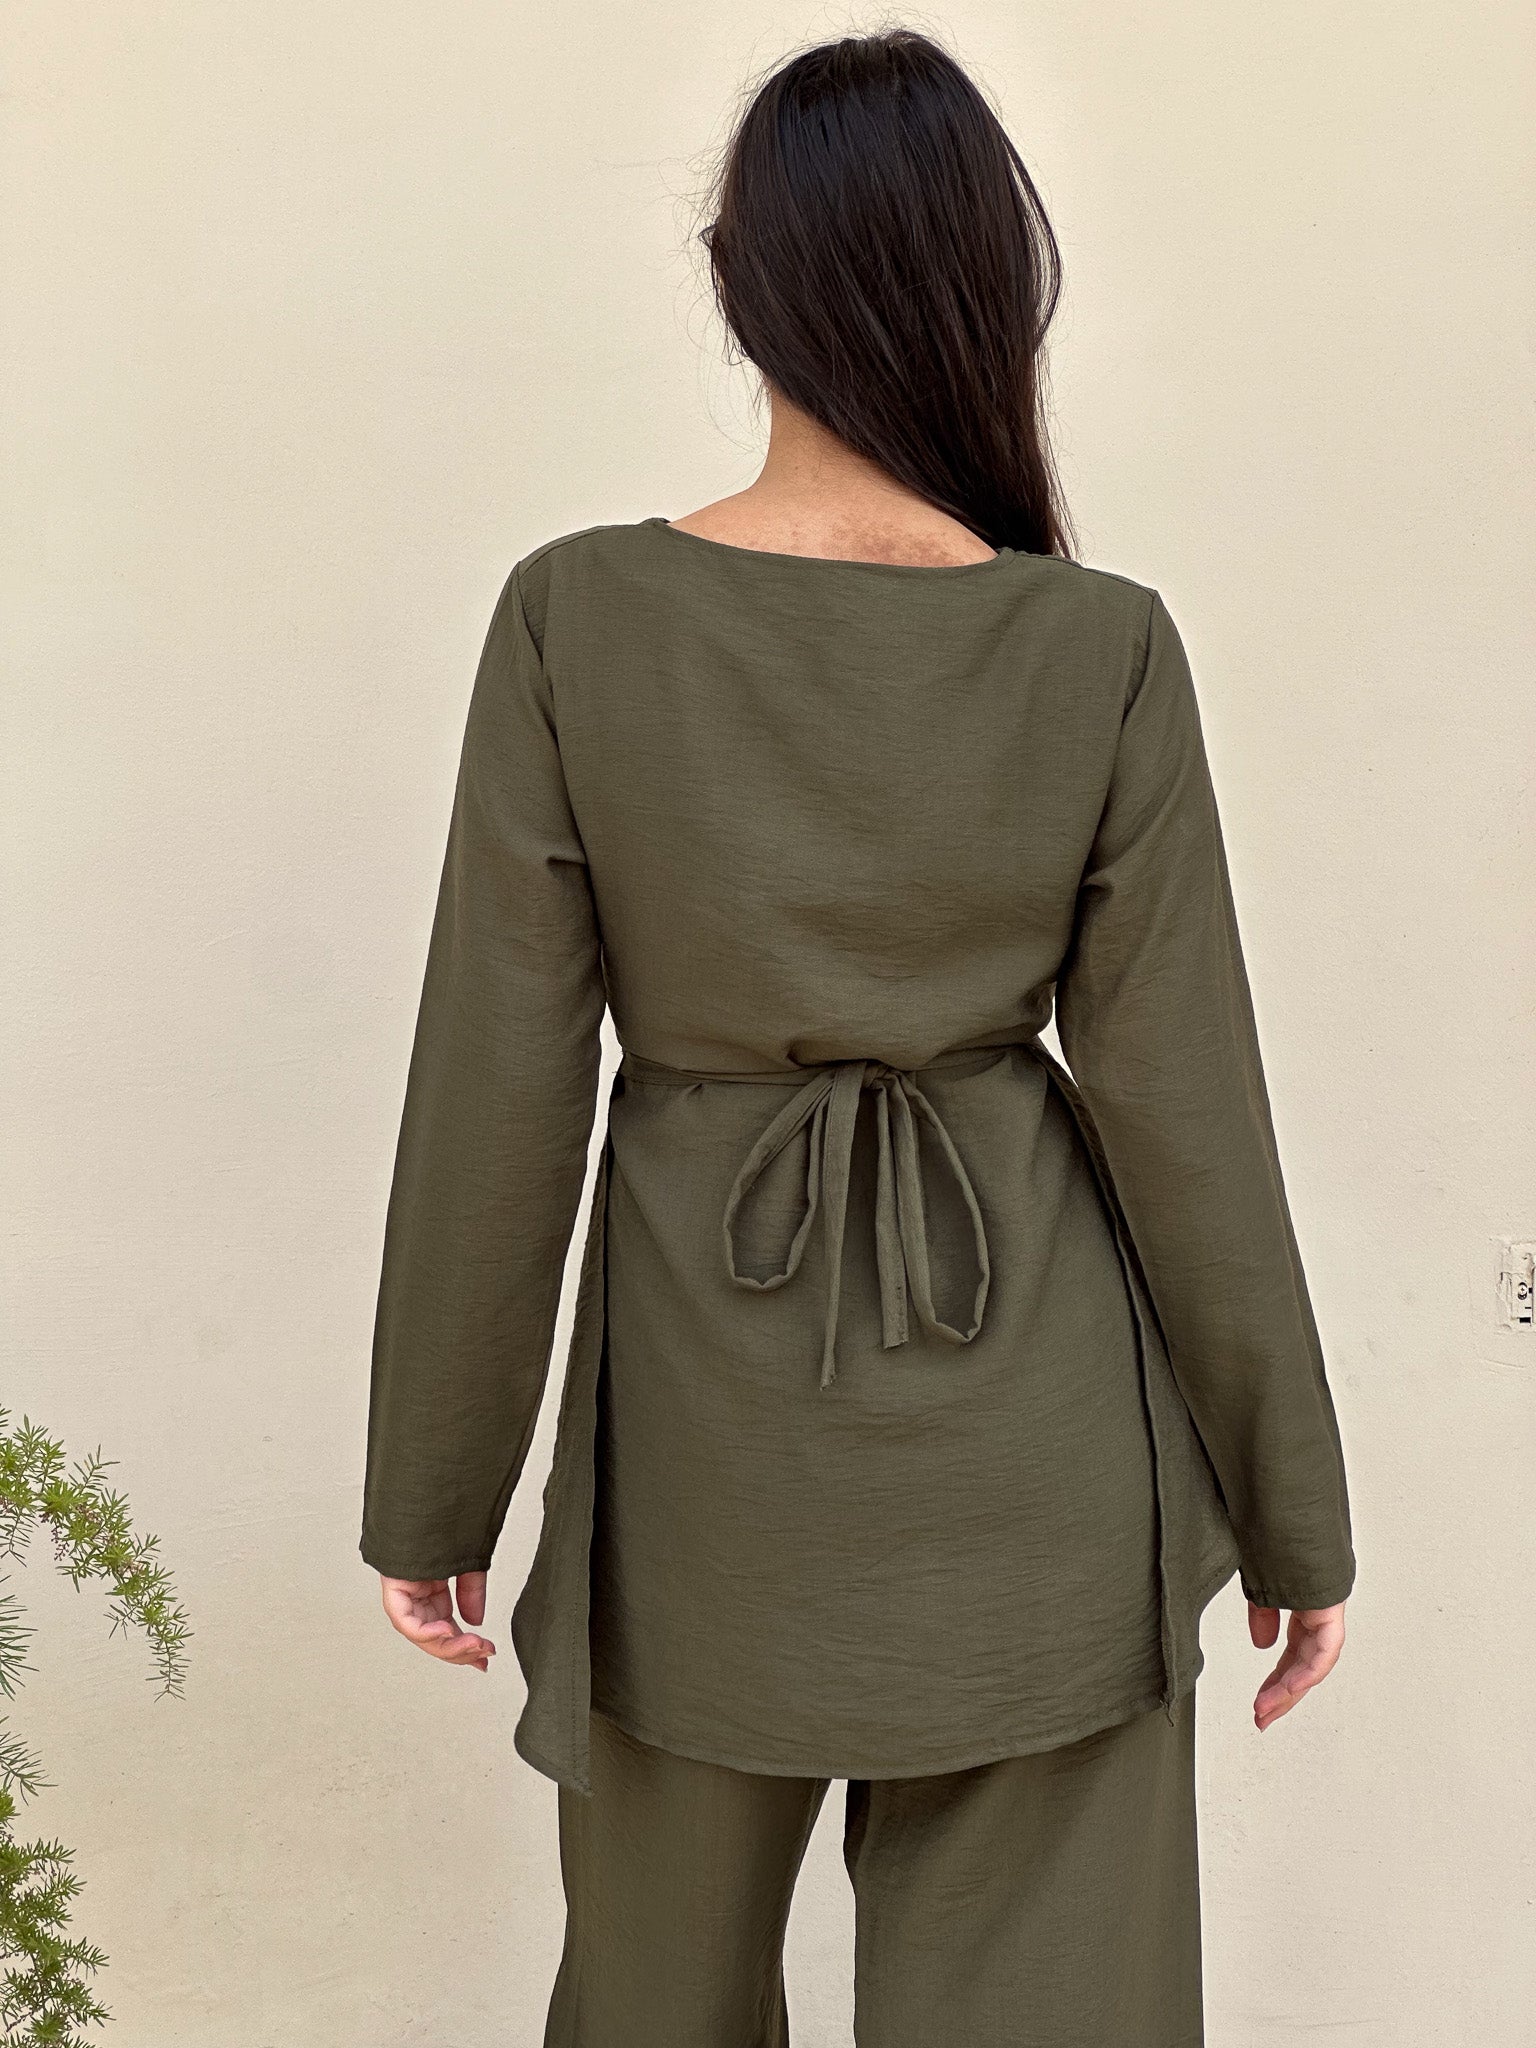 Mystery top in olive